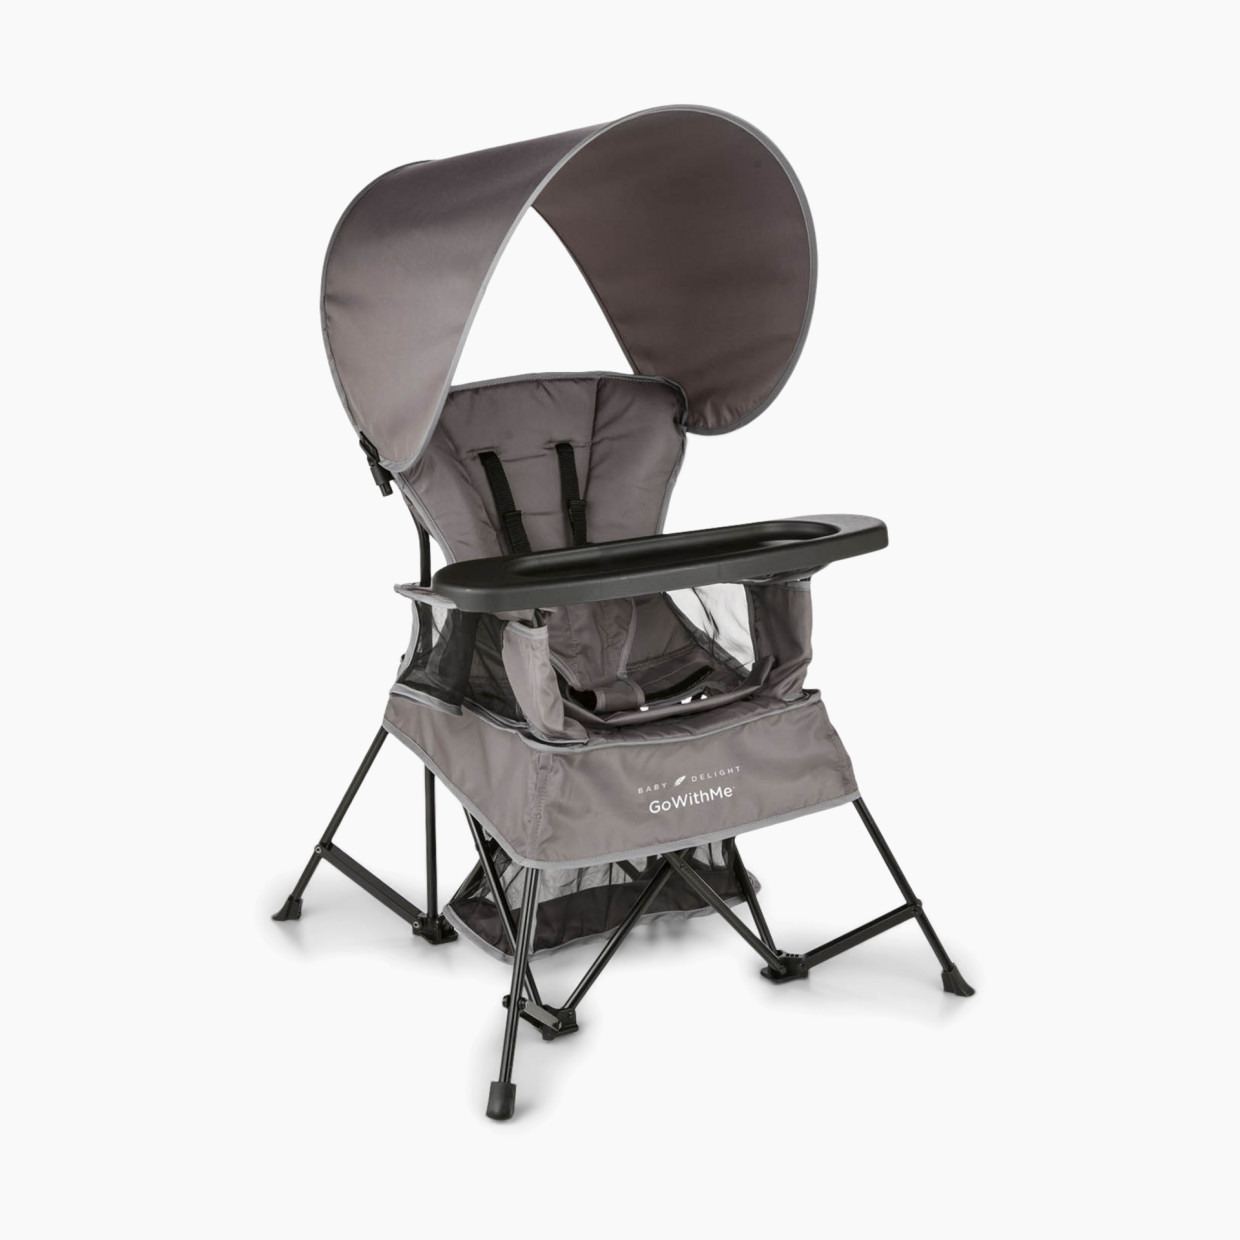 Baby Delight Go With Me Venture Deluxe Portable Chair - Grey.